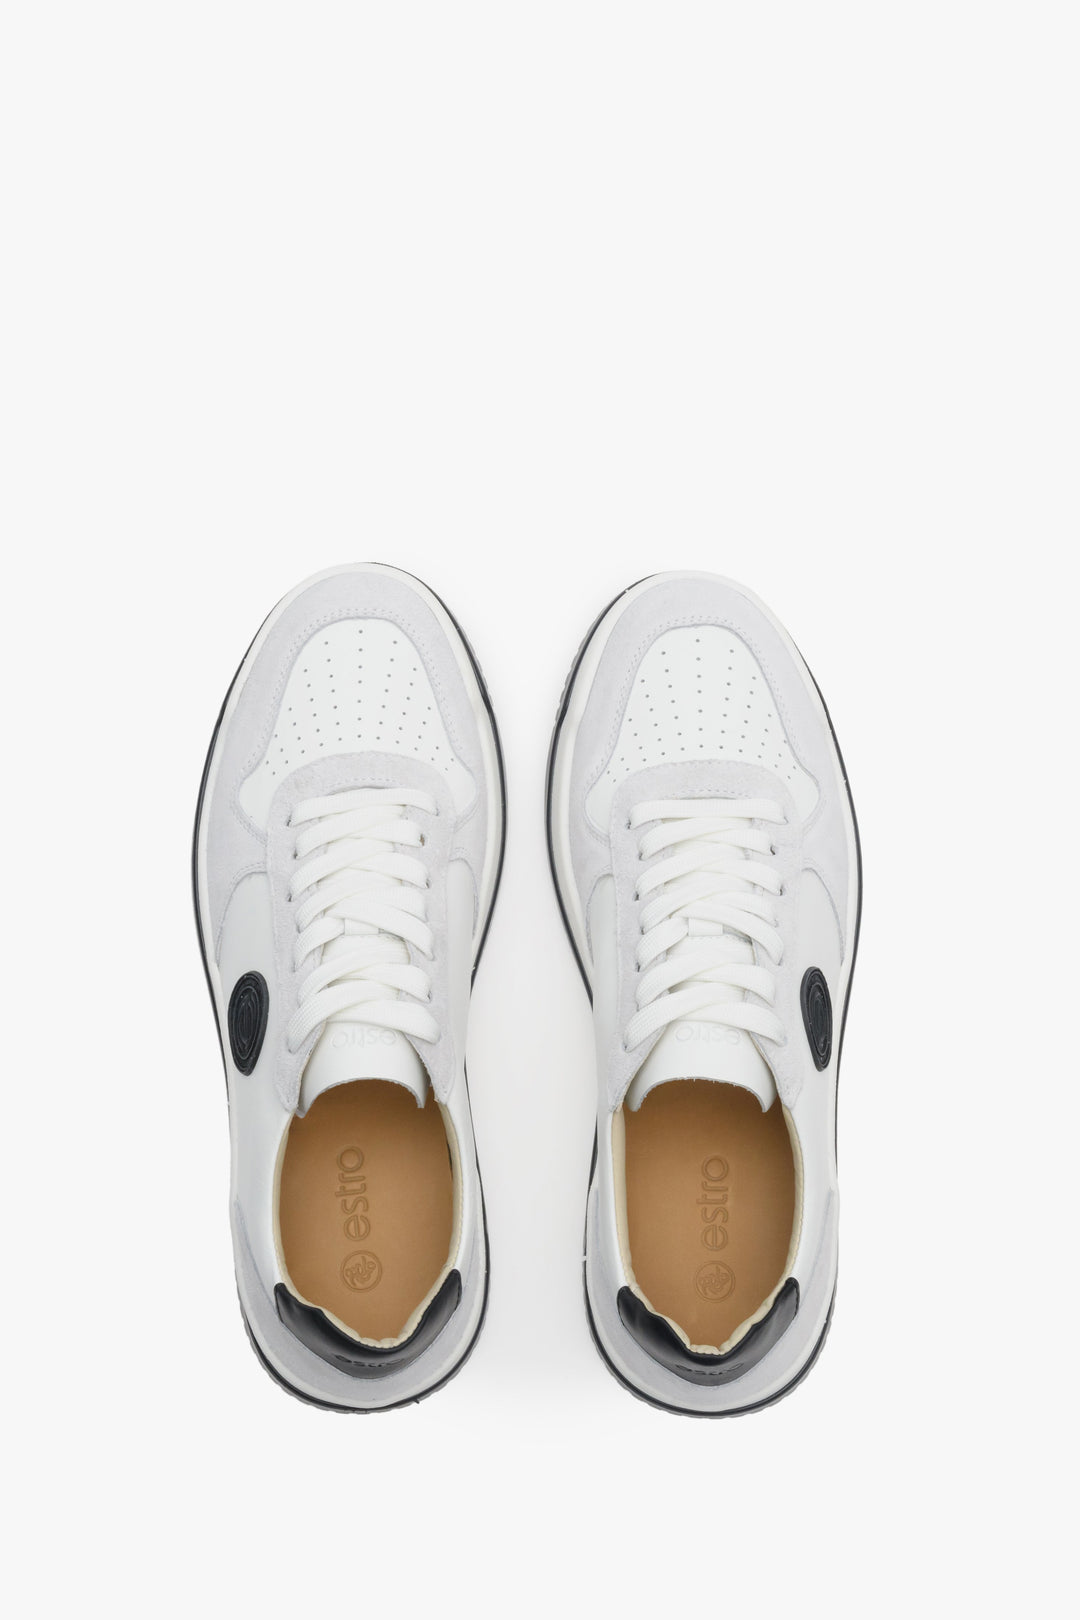 Men's grey and white leather and suede Estro sneakers for spring - presentation of the model from above.